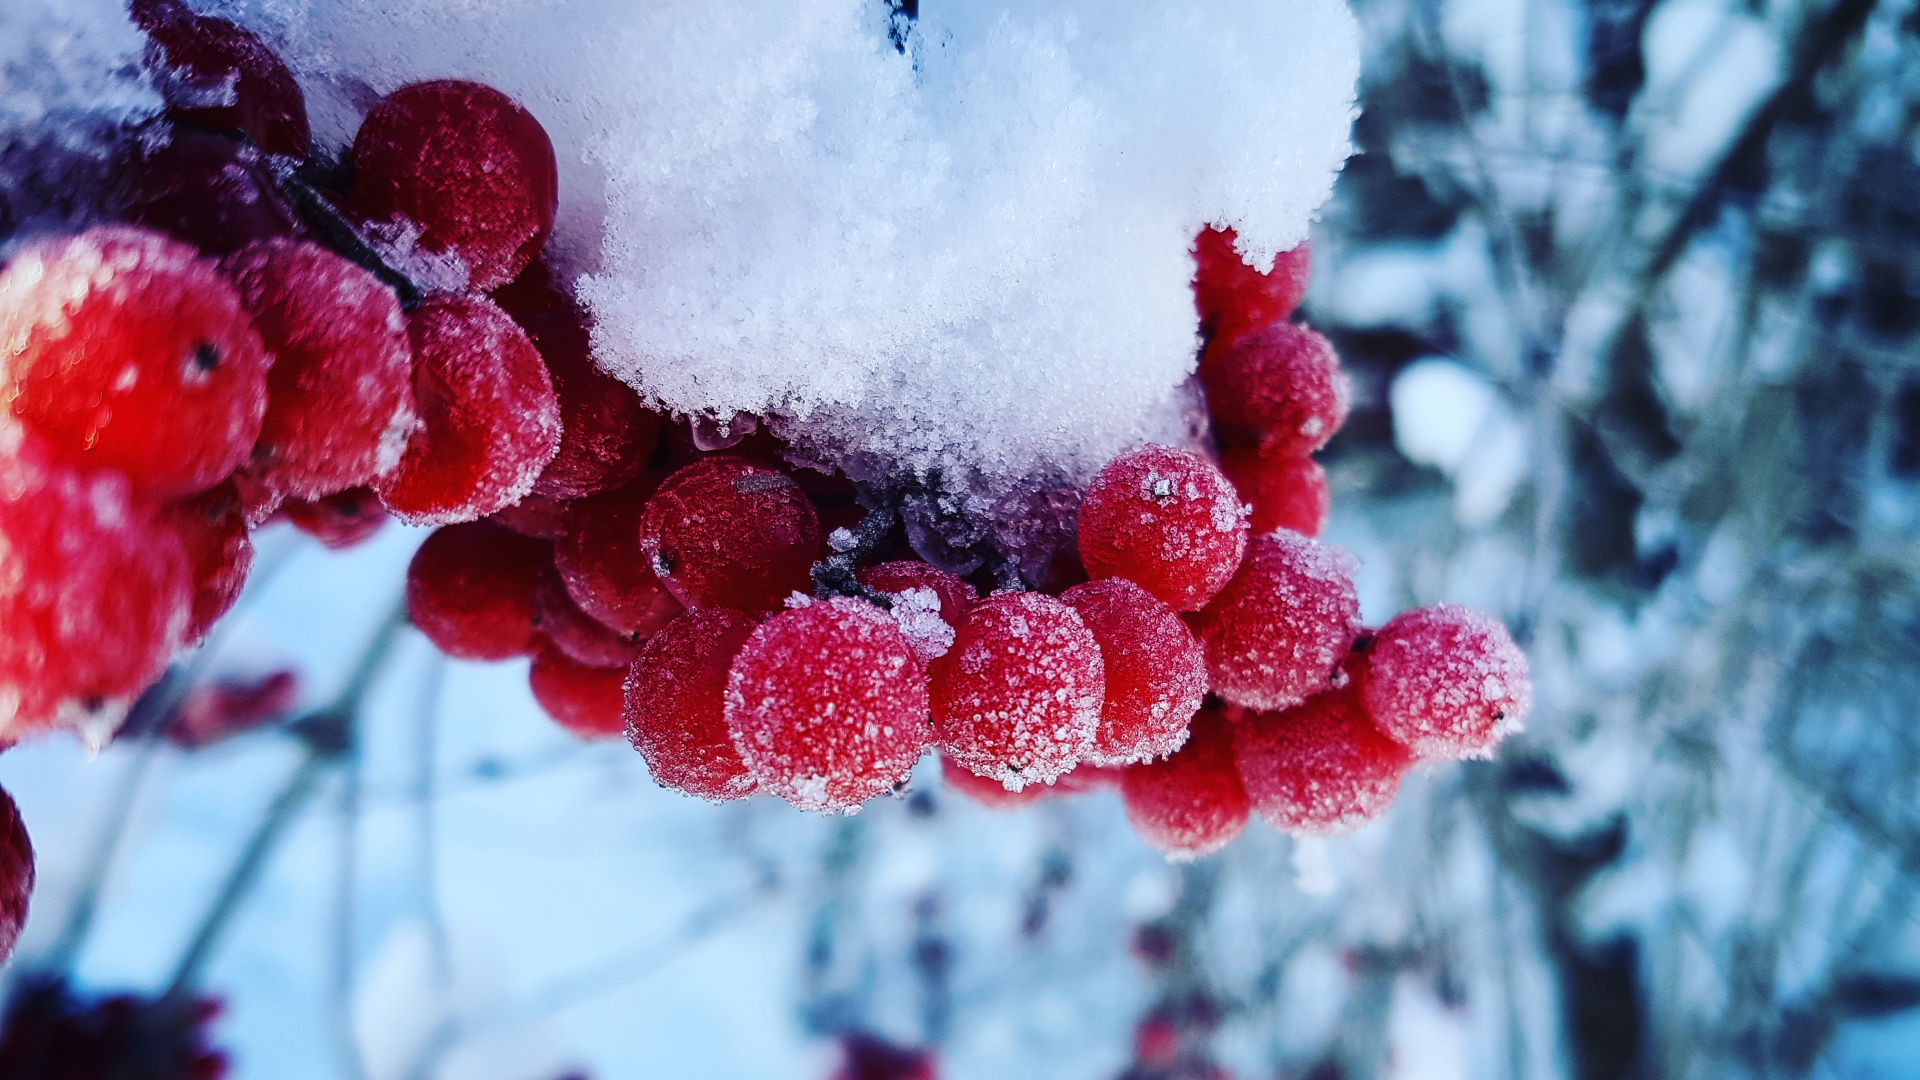 Red Round Fruits Covered With Snow. Wallpaper in 1920x1080 Resolution